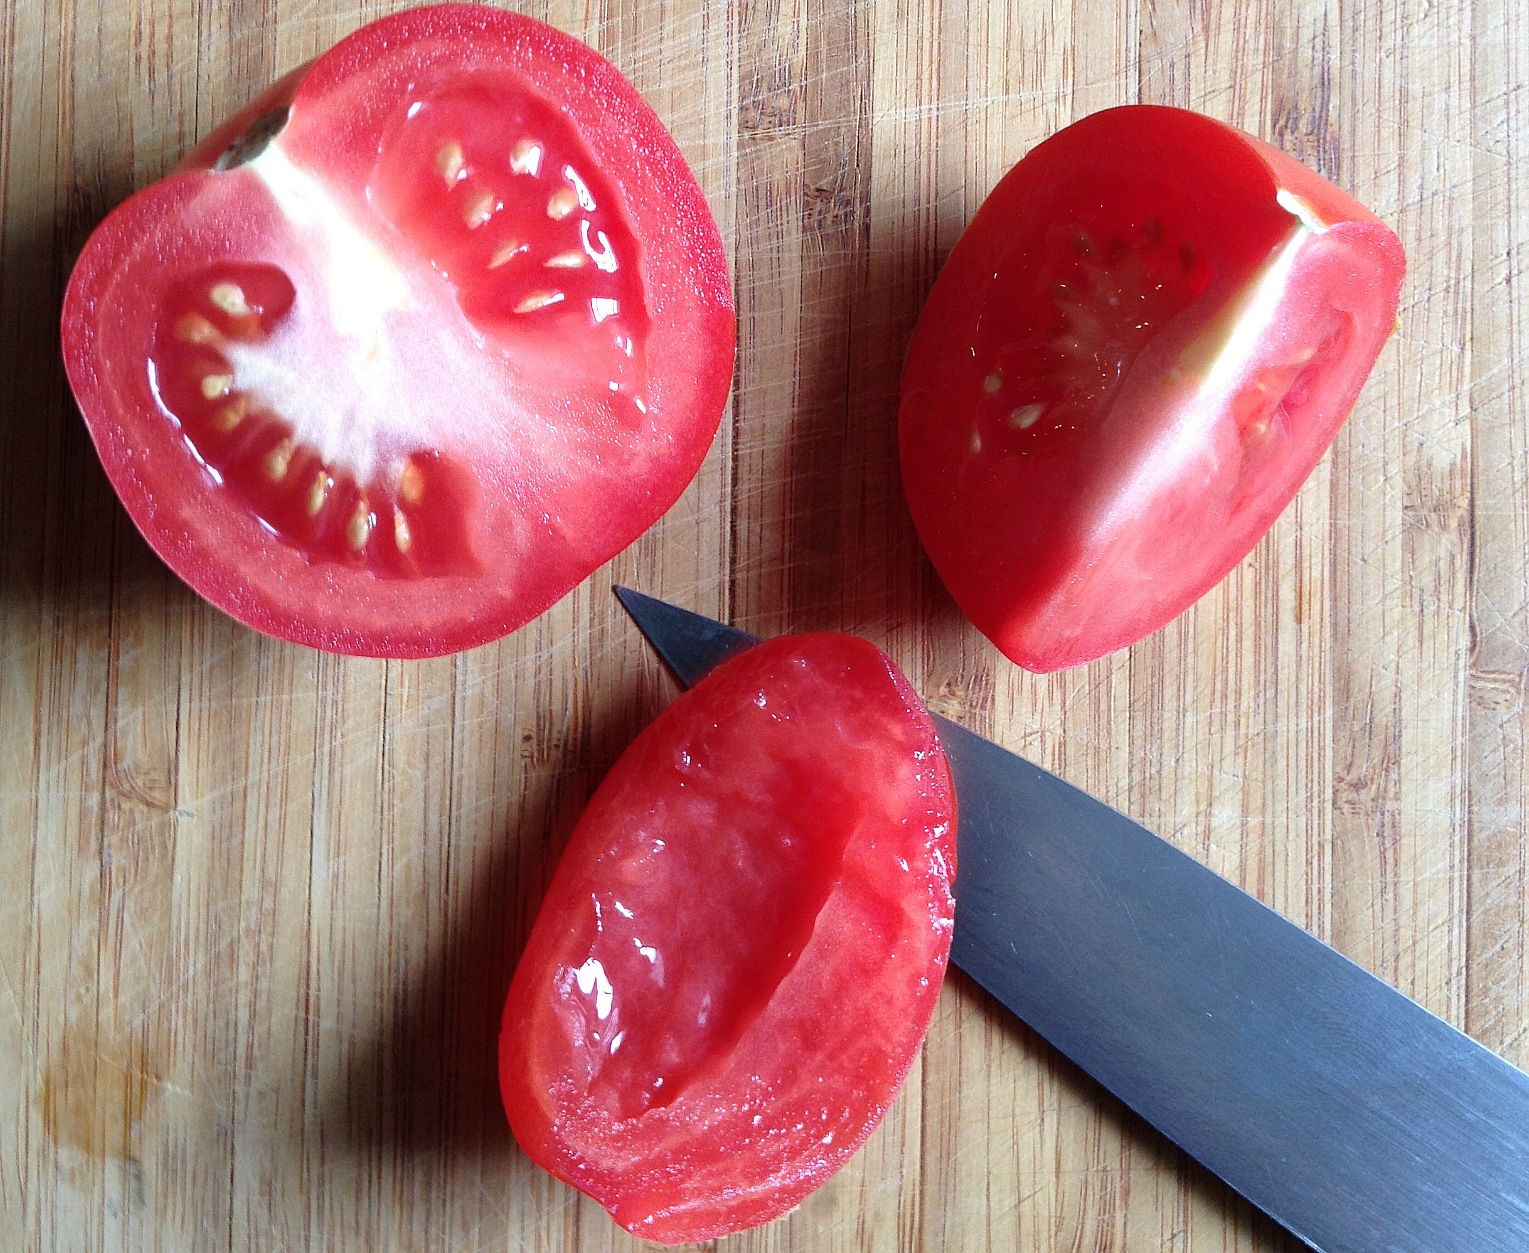 Removing the seeds of a tomato with a sharp knife